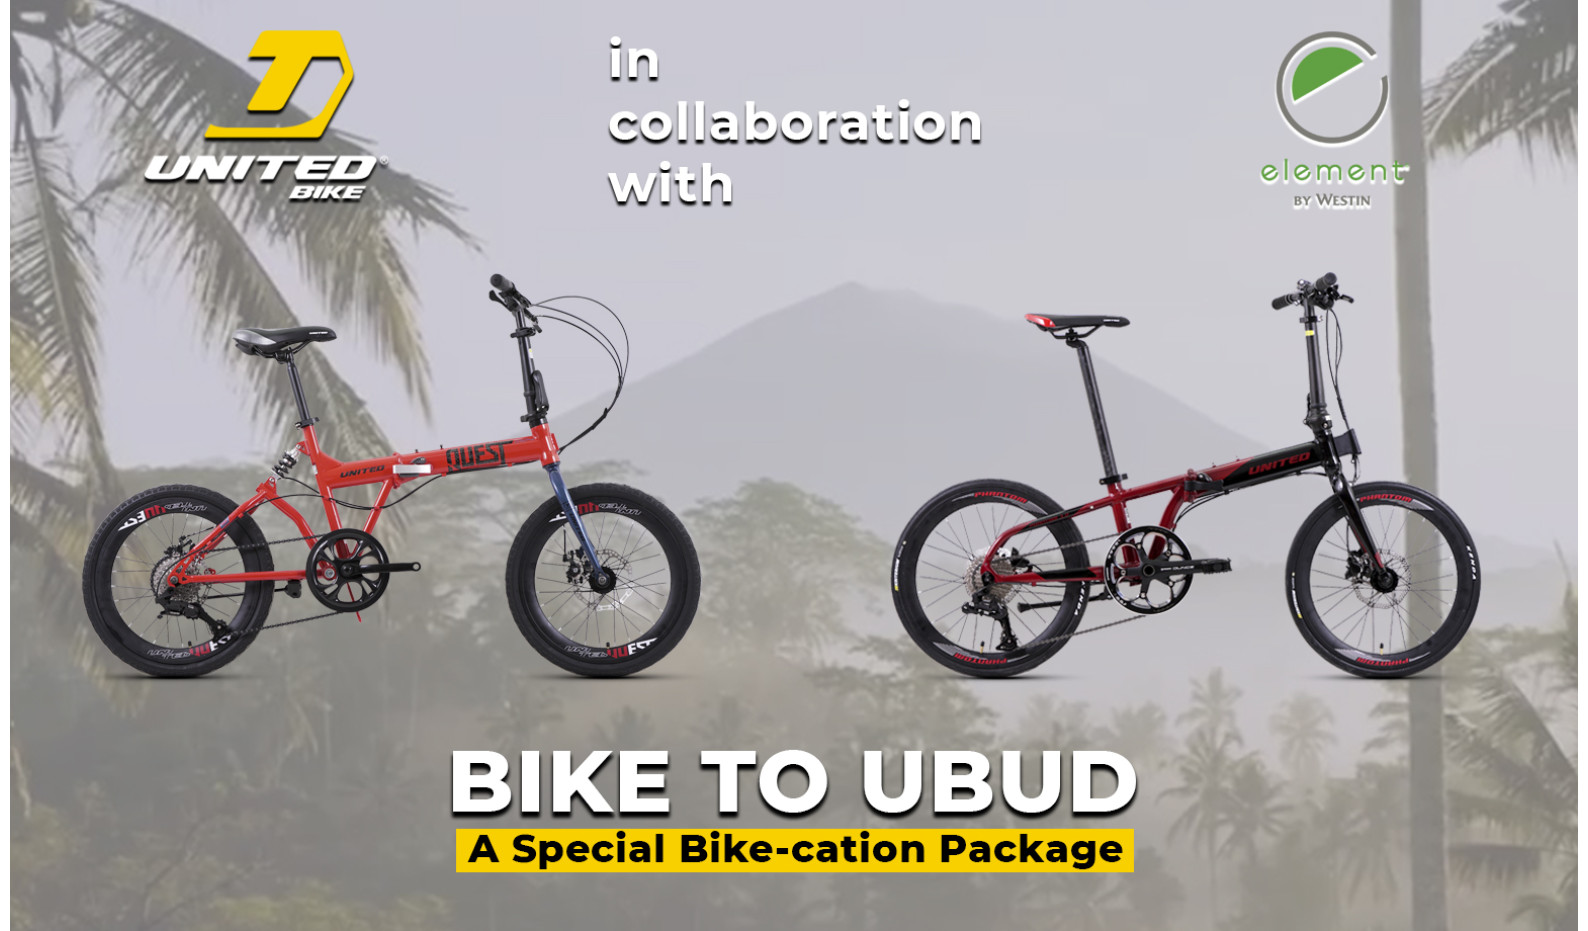 BIKE TO UBUD: A Special Bike-cation Package